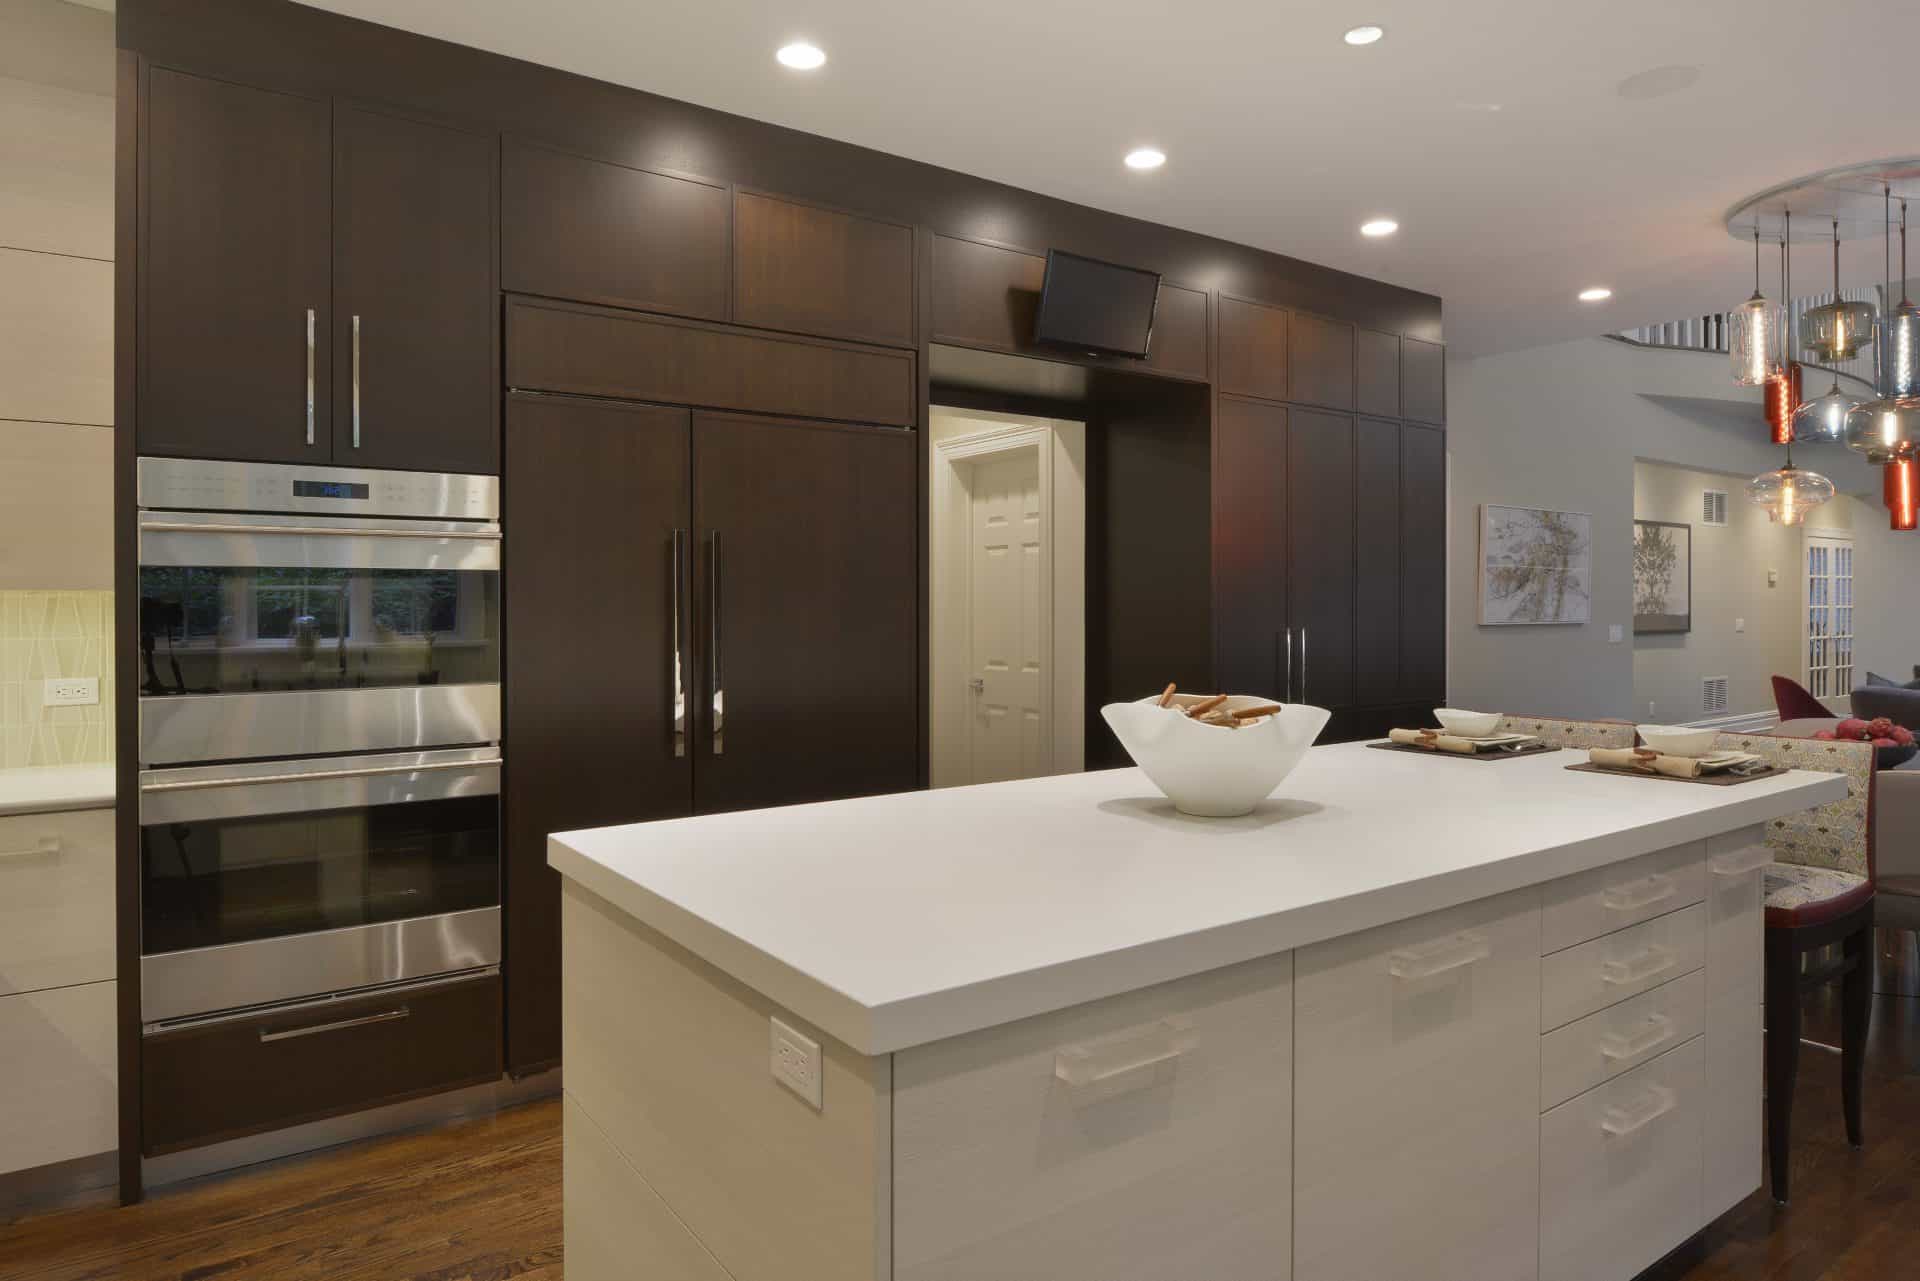 U-shaped kitchen features a mix of flat panel white textured laminate and shaker style walnut fully custom cabinets by Artcraft. The kitchen has white quartz countertops throughout, oak flooring, and a mix of chrome and red accents. Design by RitaLuisa Garces of Bilotta Kitchens.